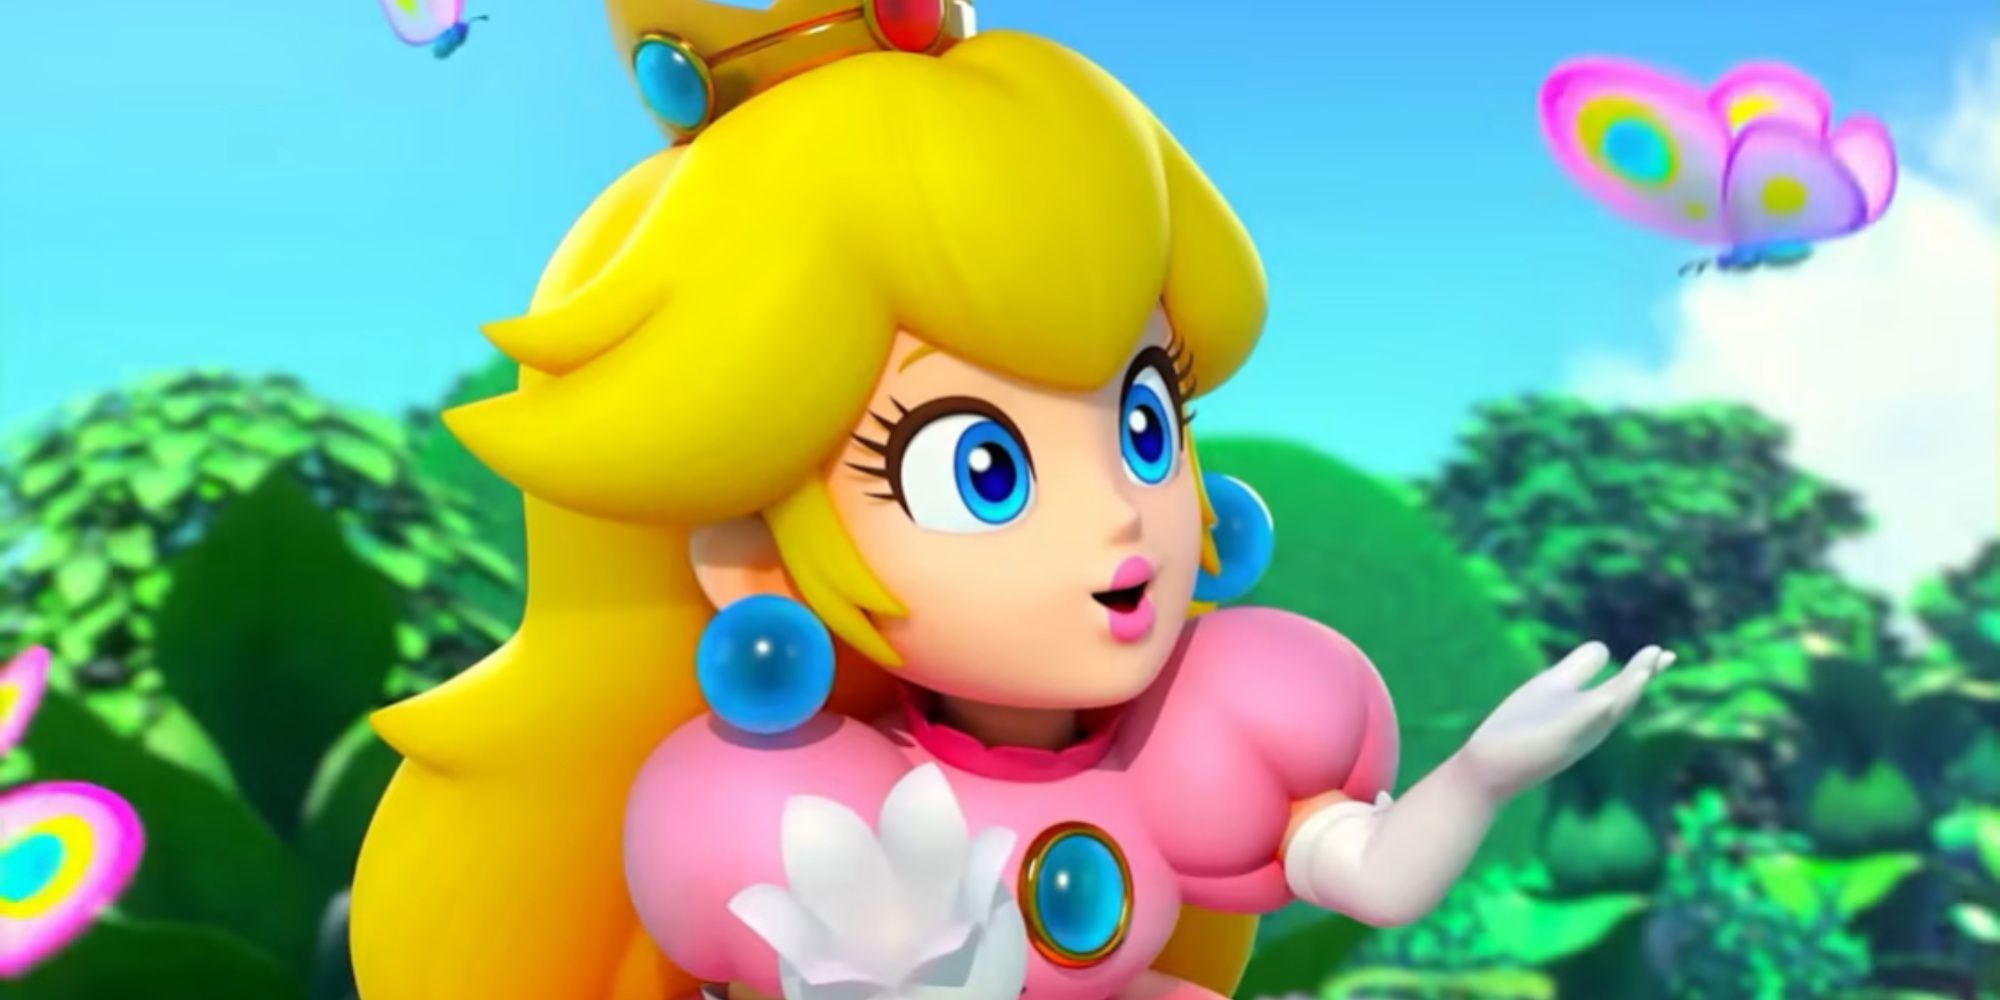 princess peach looking at a butterfly in super mario rpg